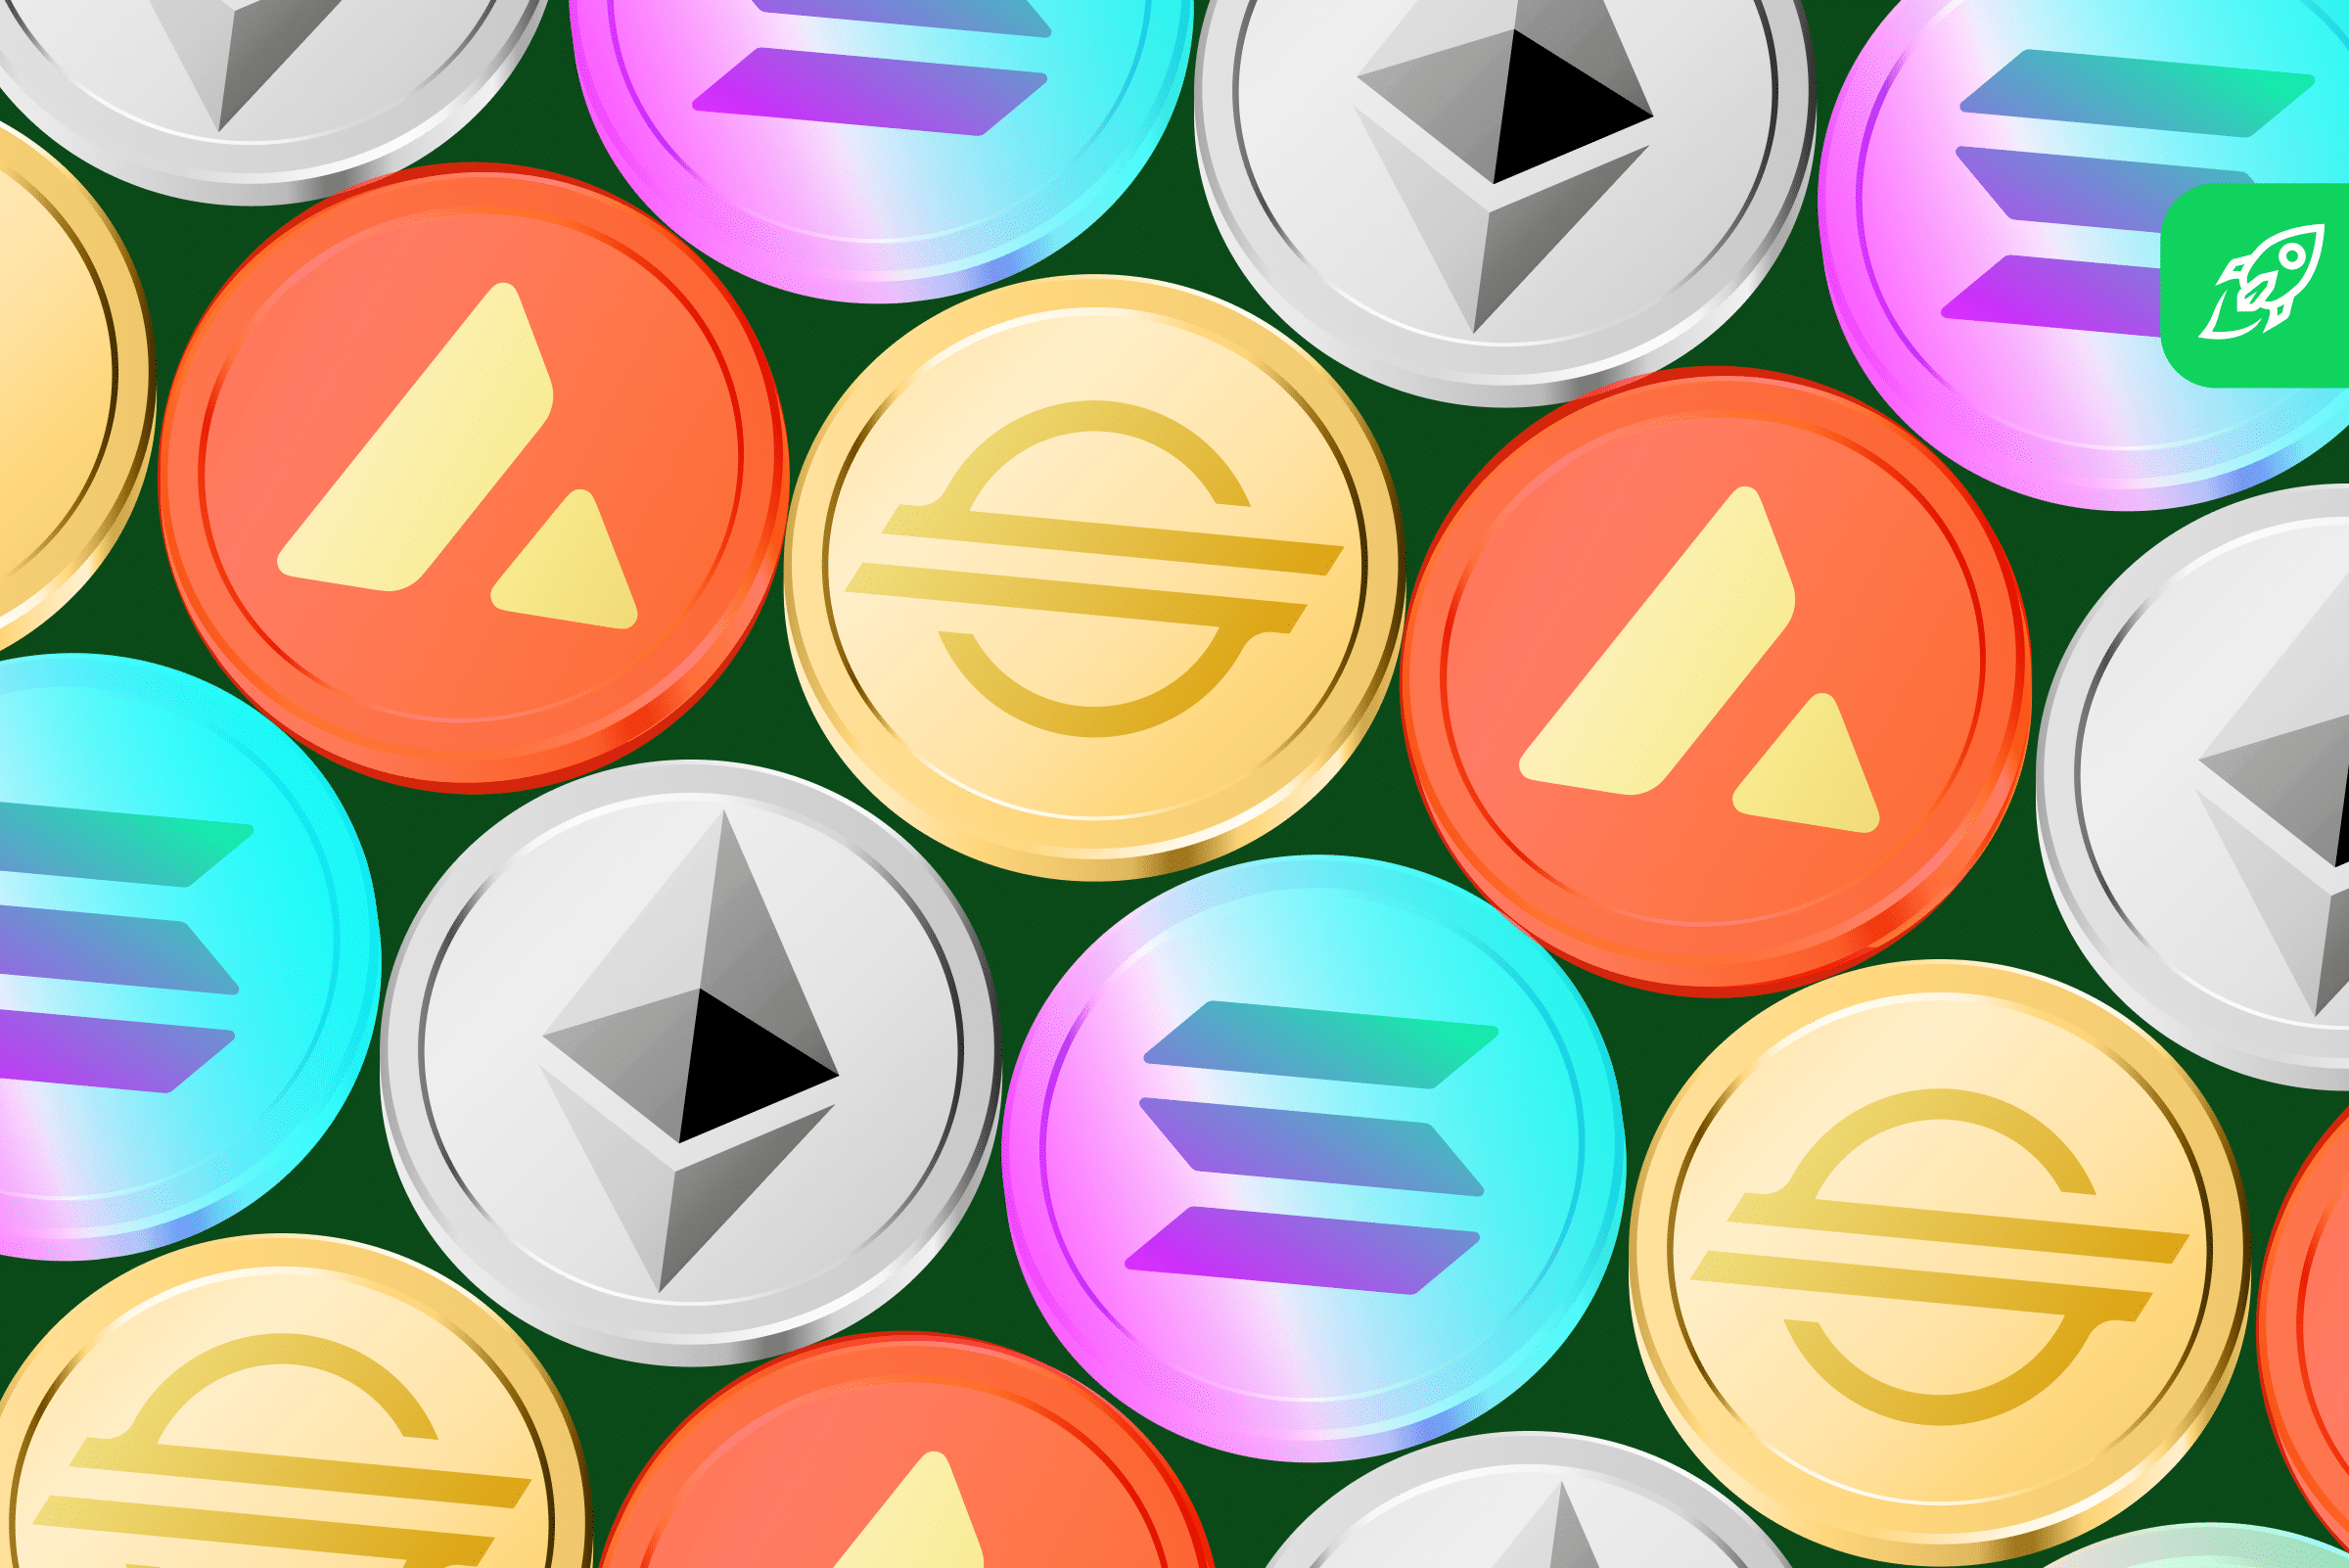 Best Altcoins To Buy Ahead Of The Next Bull Run